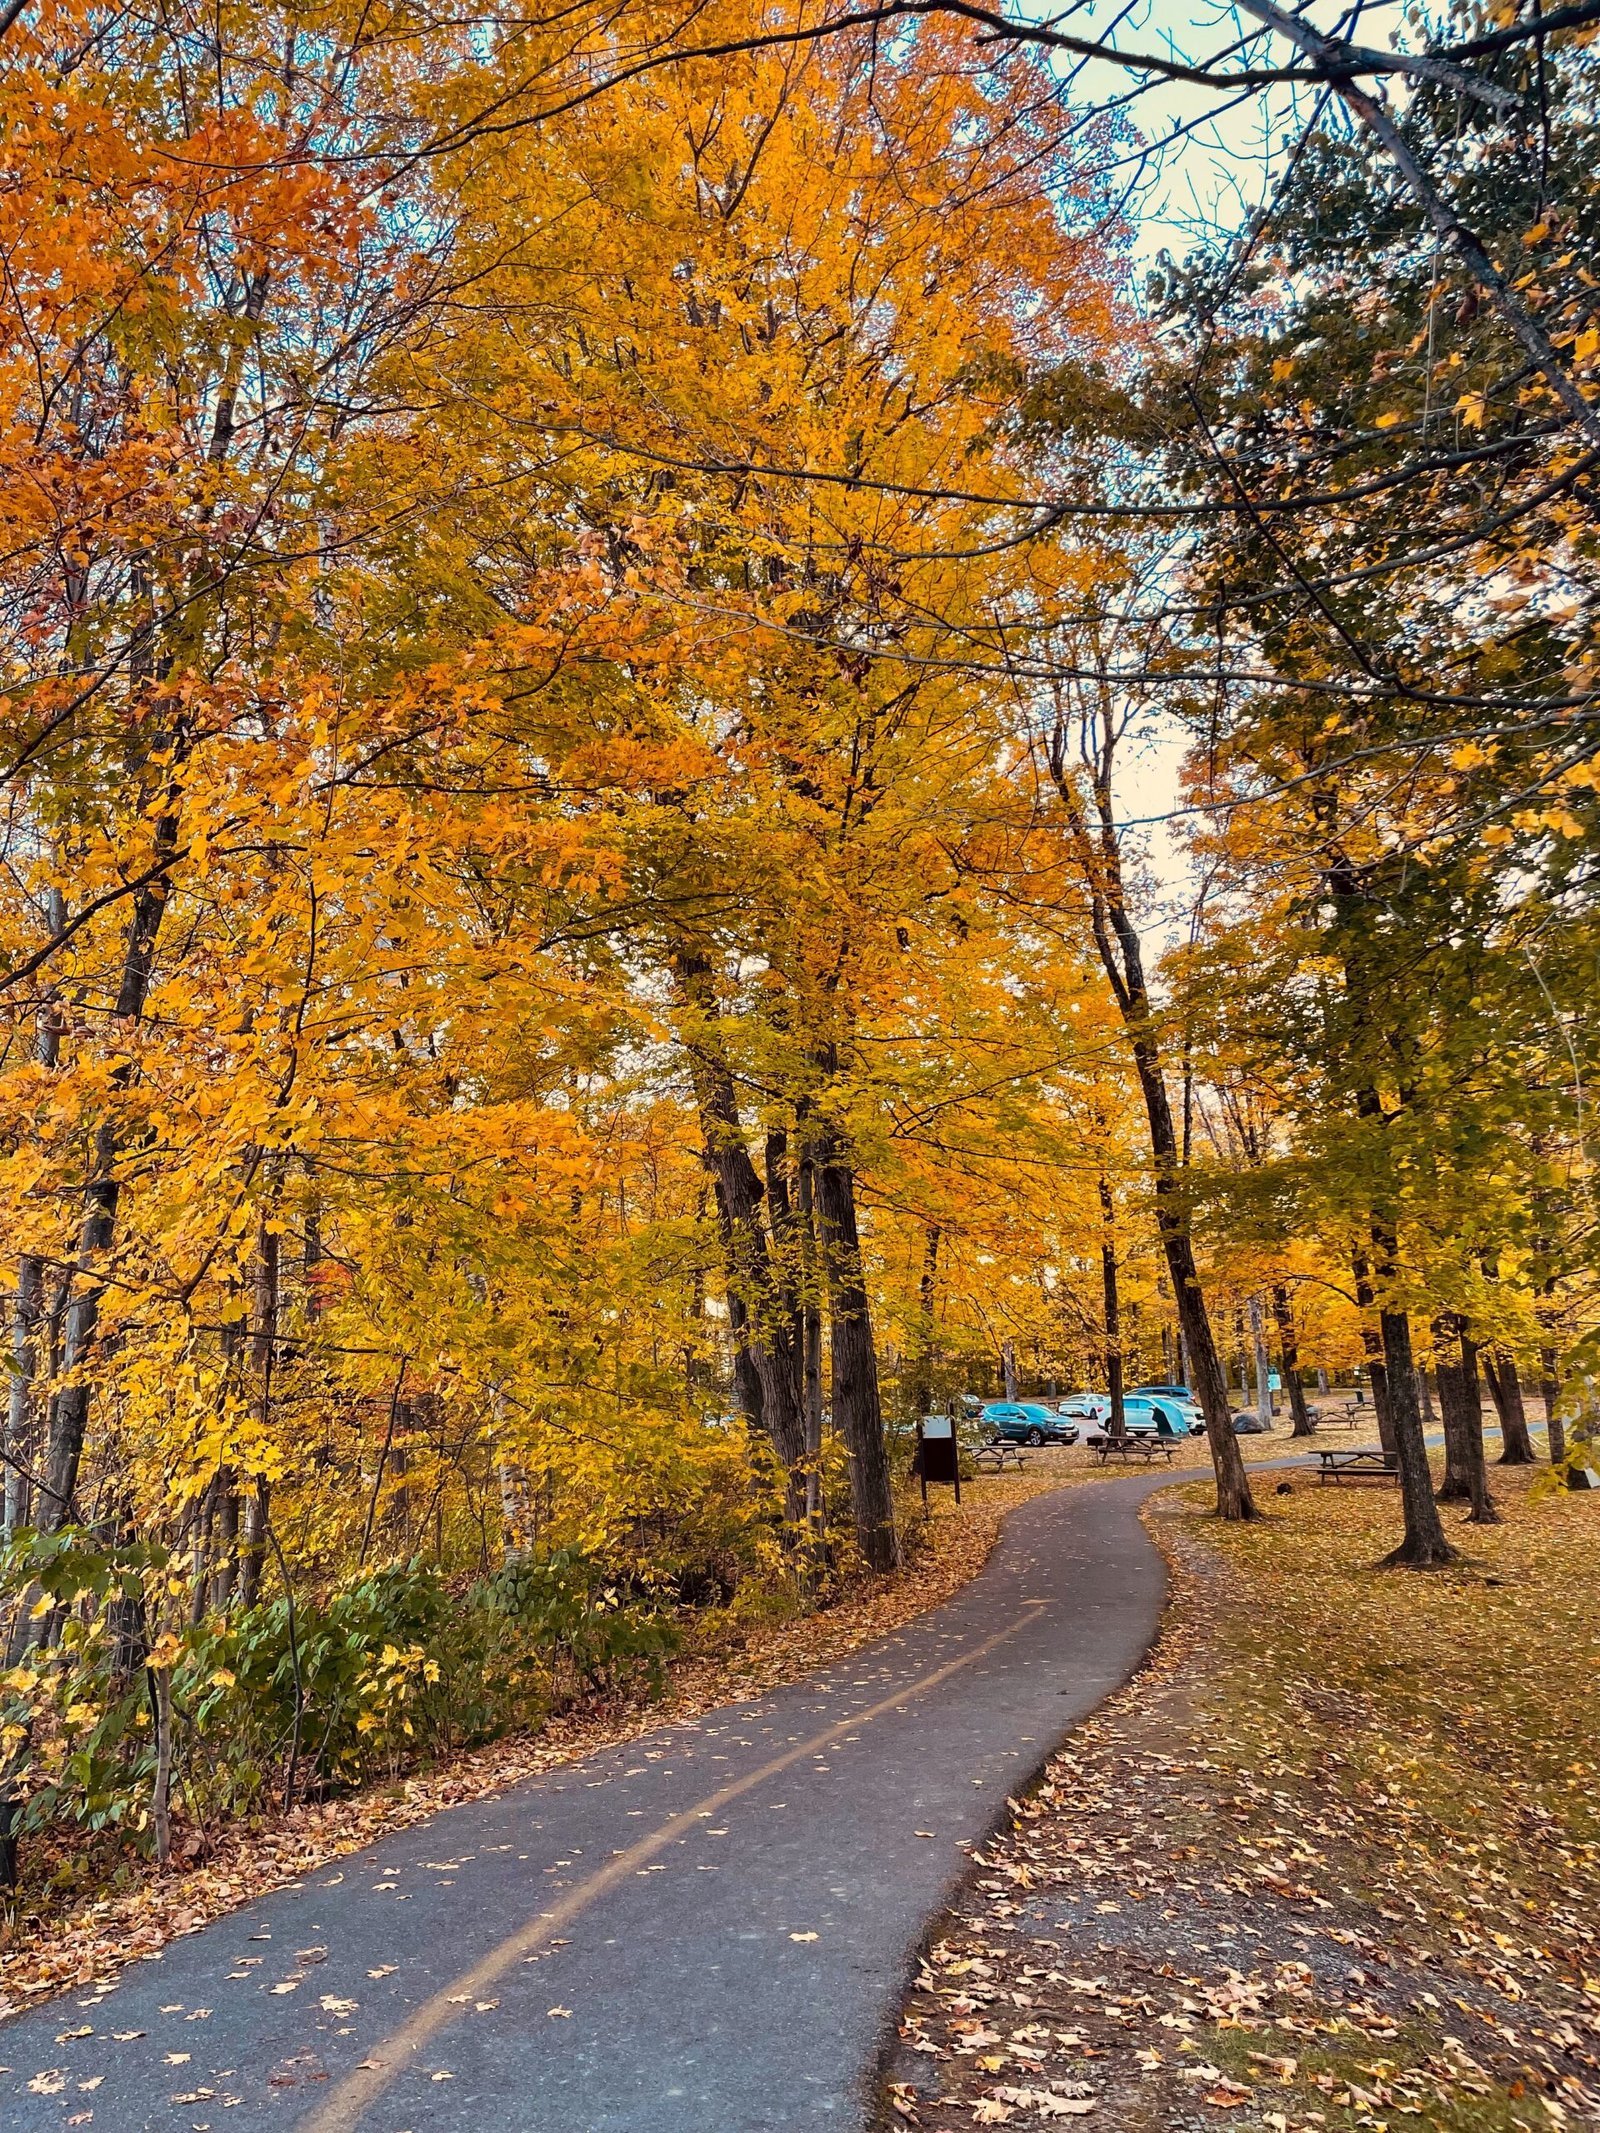 a road surrounded by trees with yellow and orange leaves